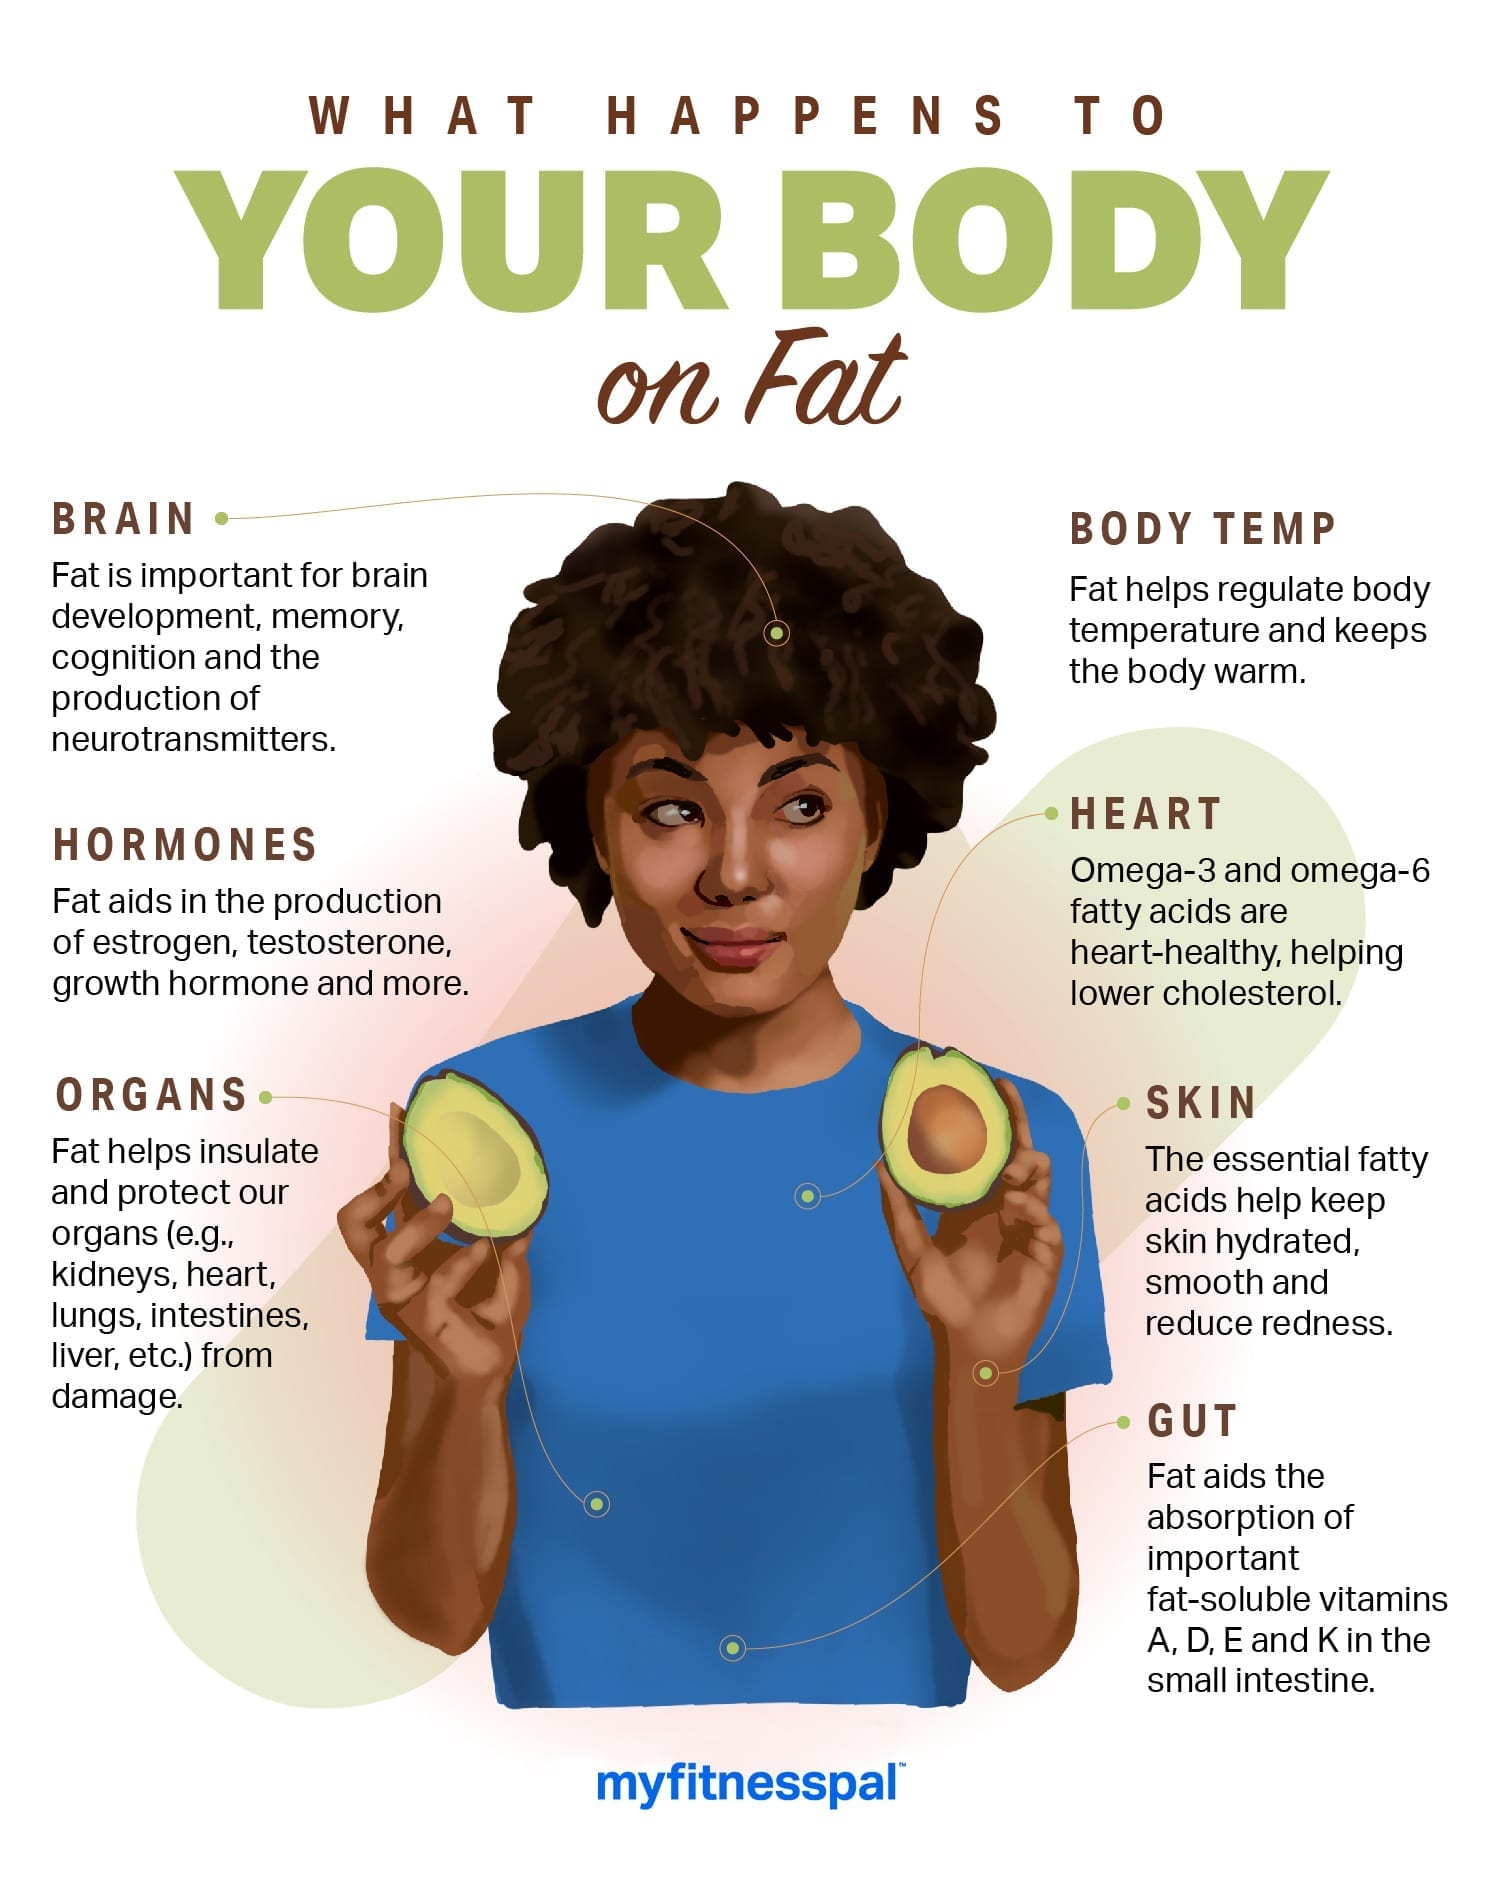 What Happens to Your Body on Fat